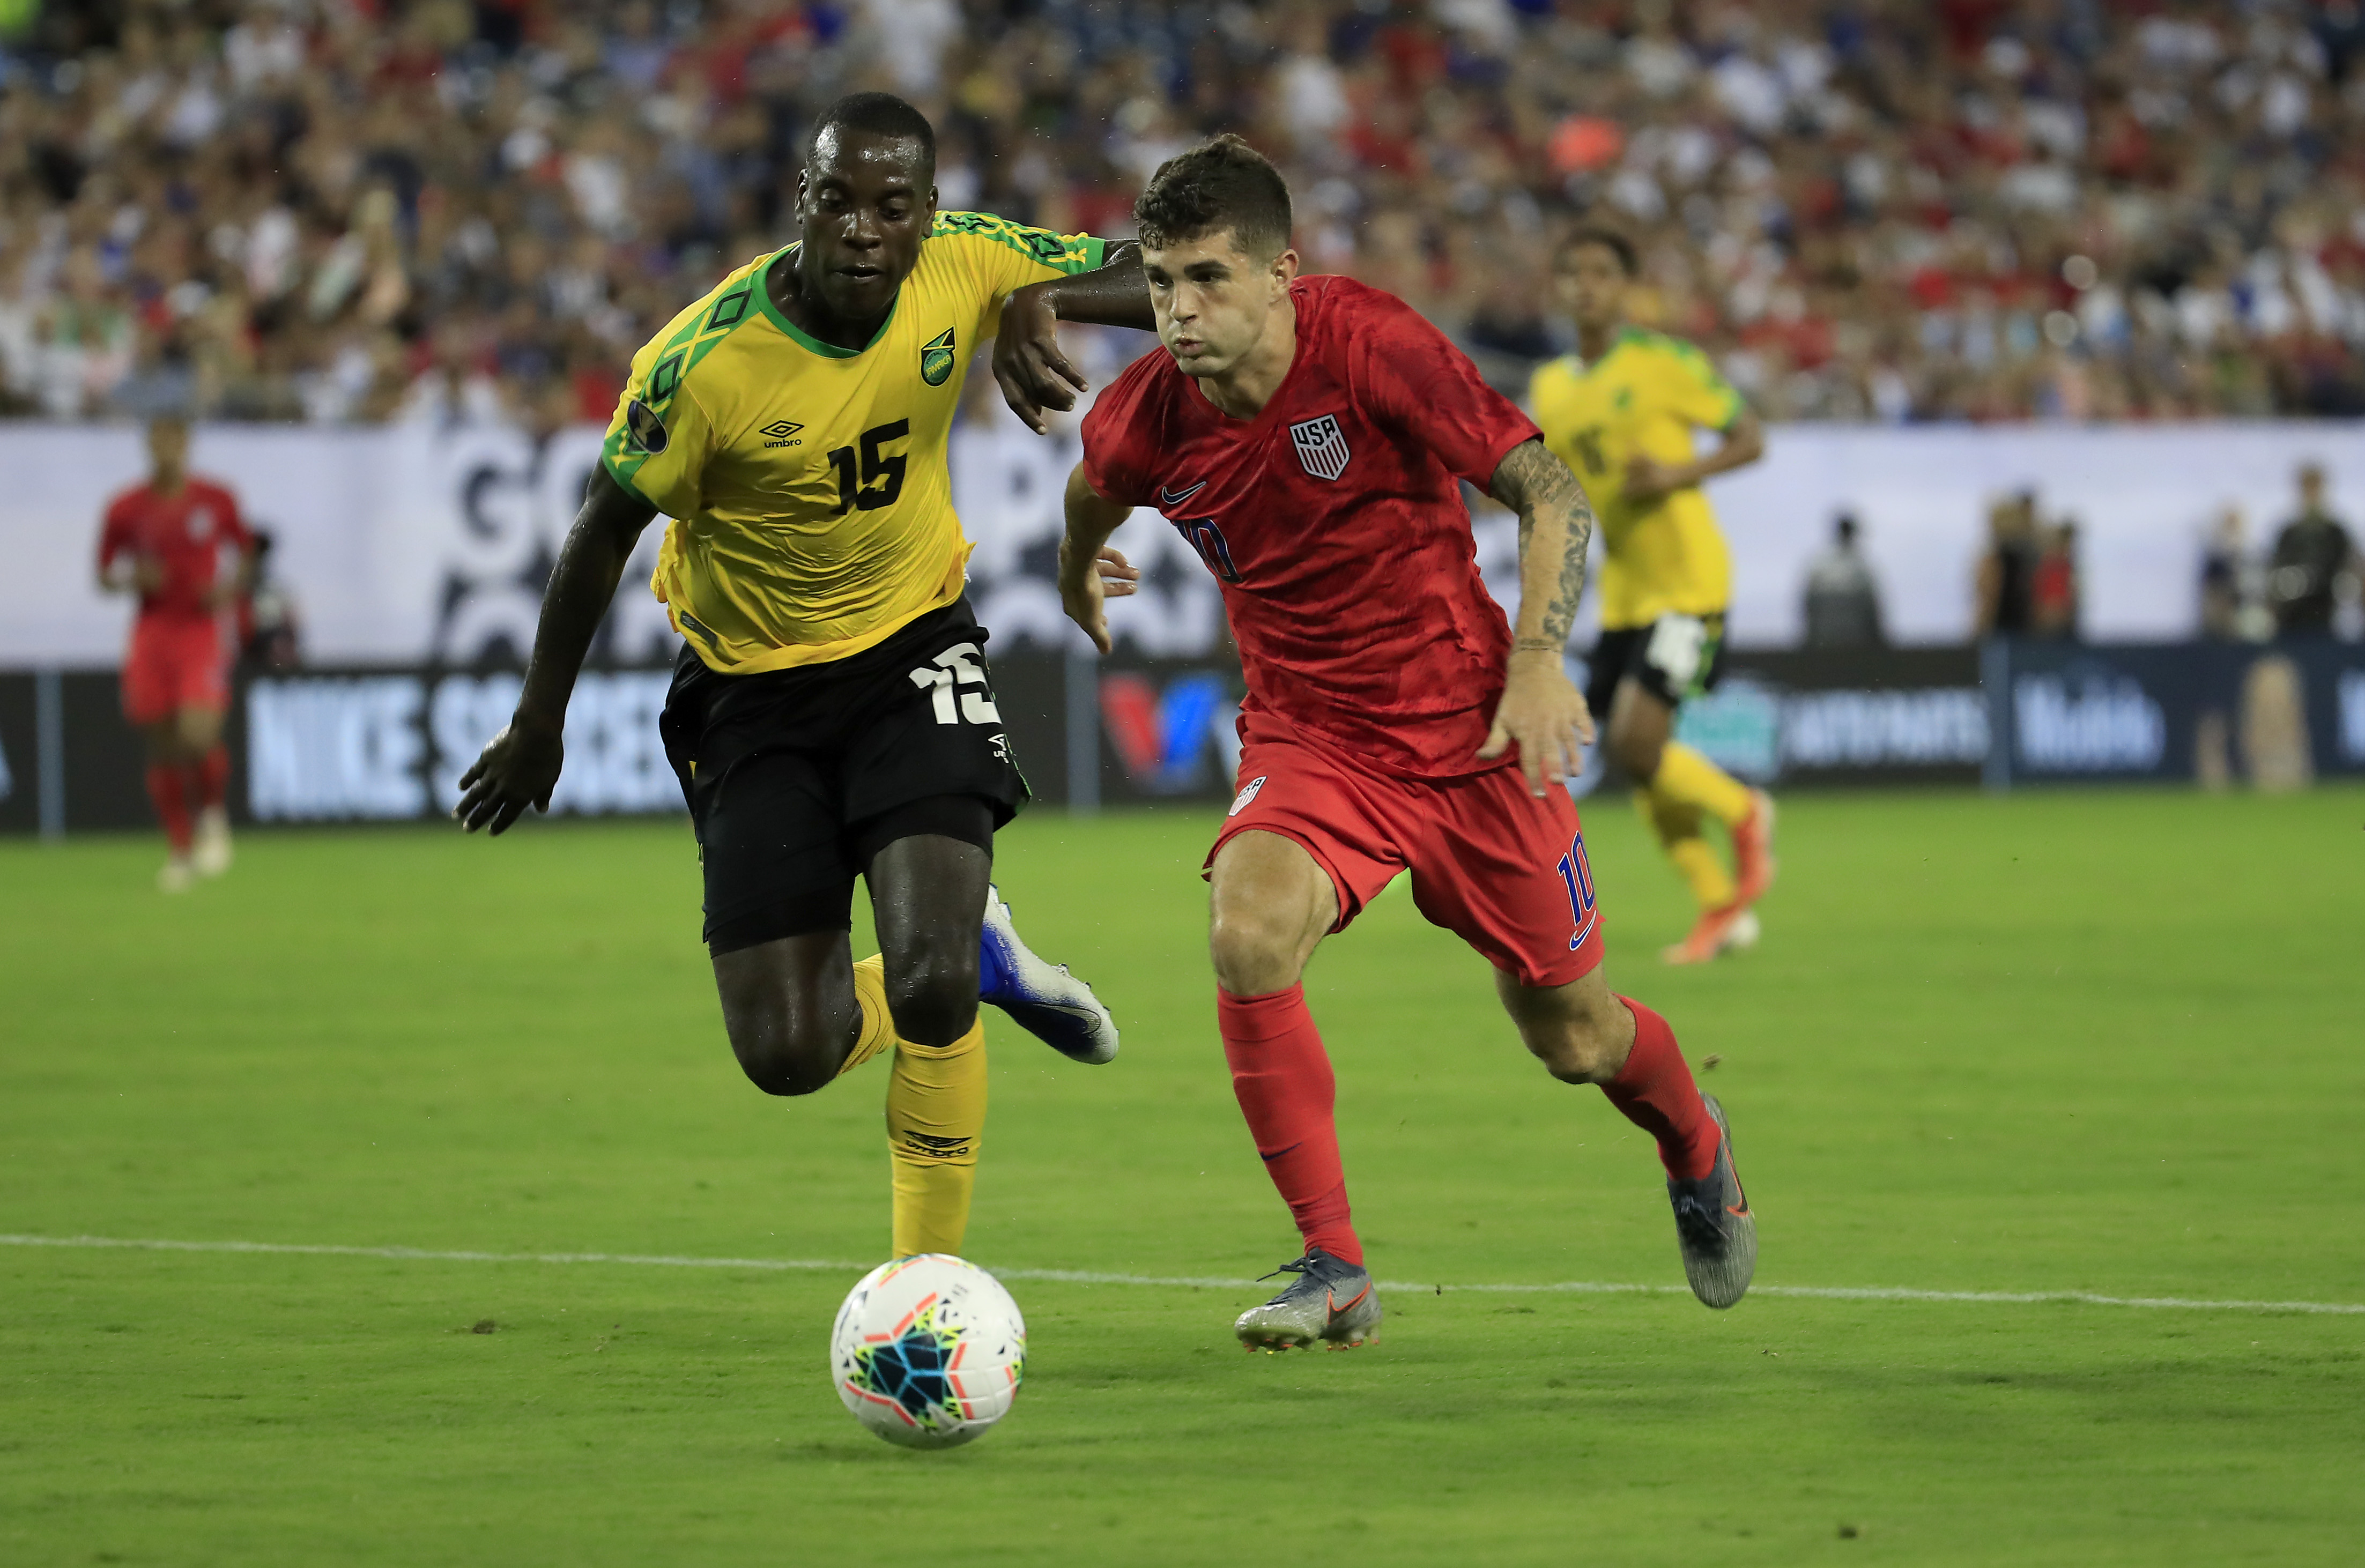 USMNT vs Jamaica Highlights: Pulisic Scores Twice In USA Win